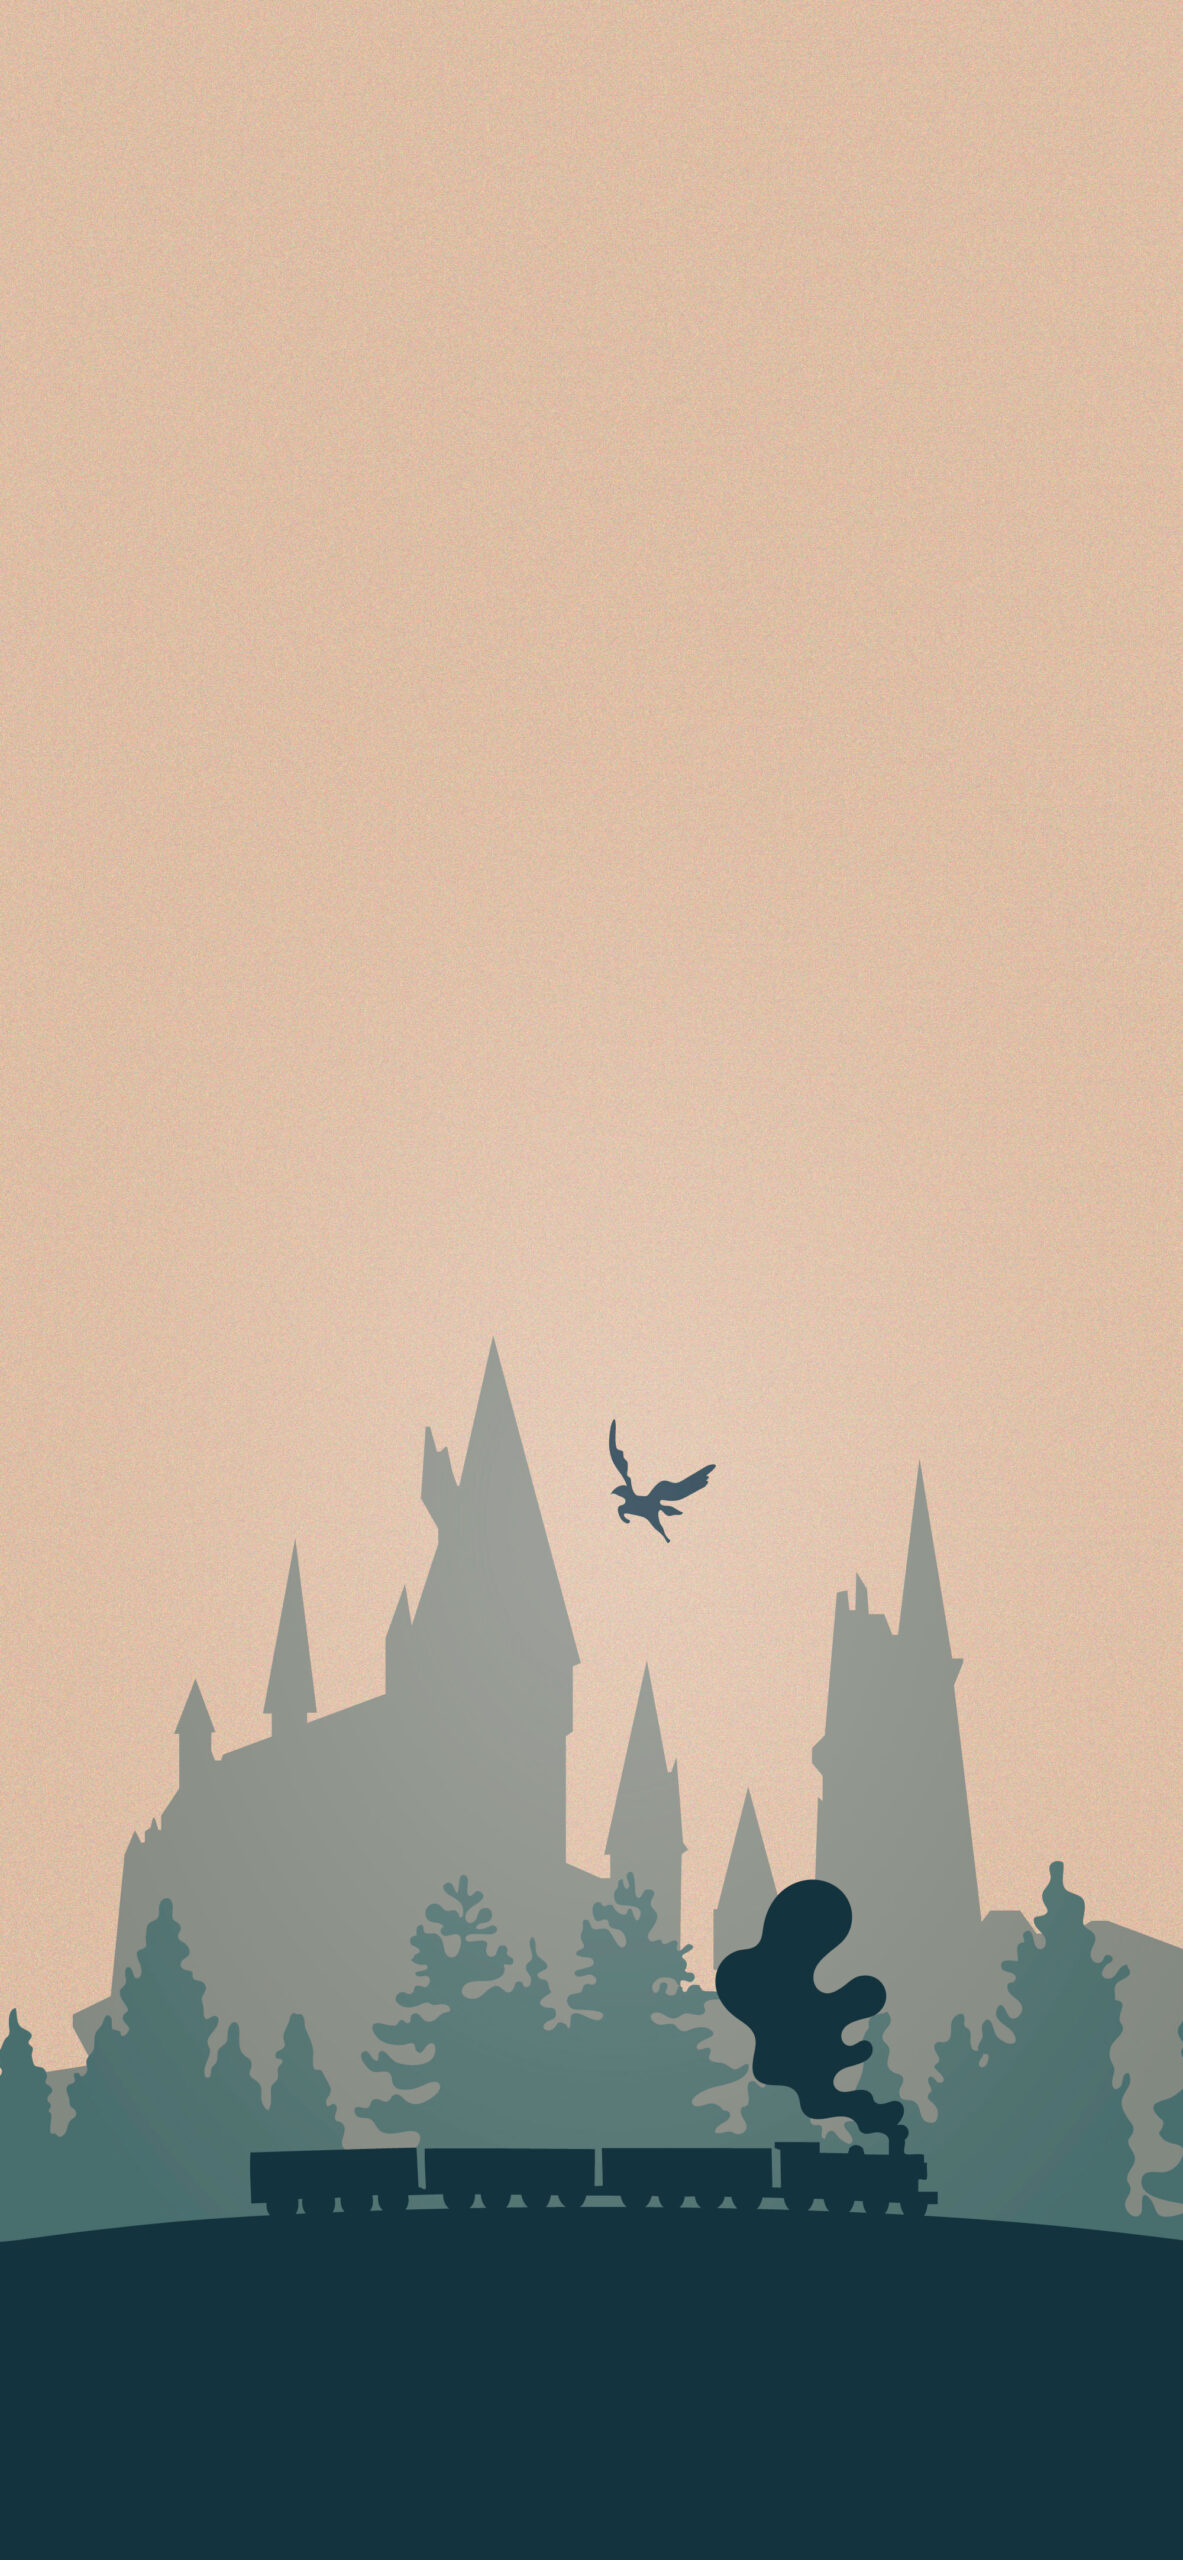 Harry Potter Wallpaper For Phone With Hogwarts